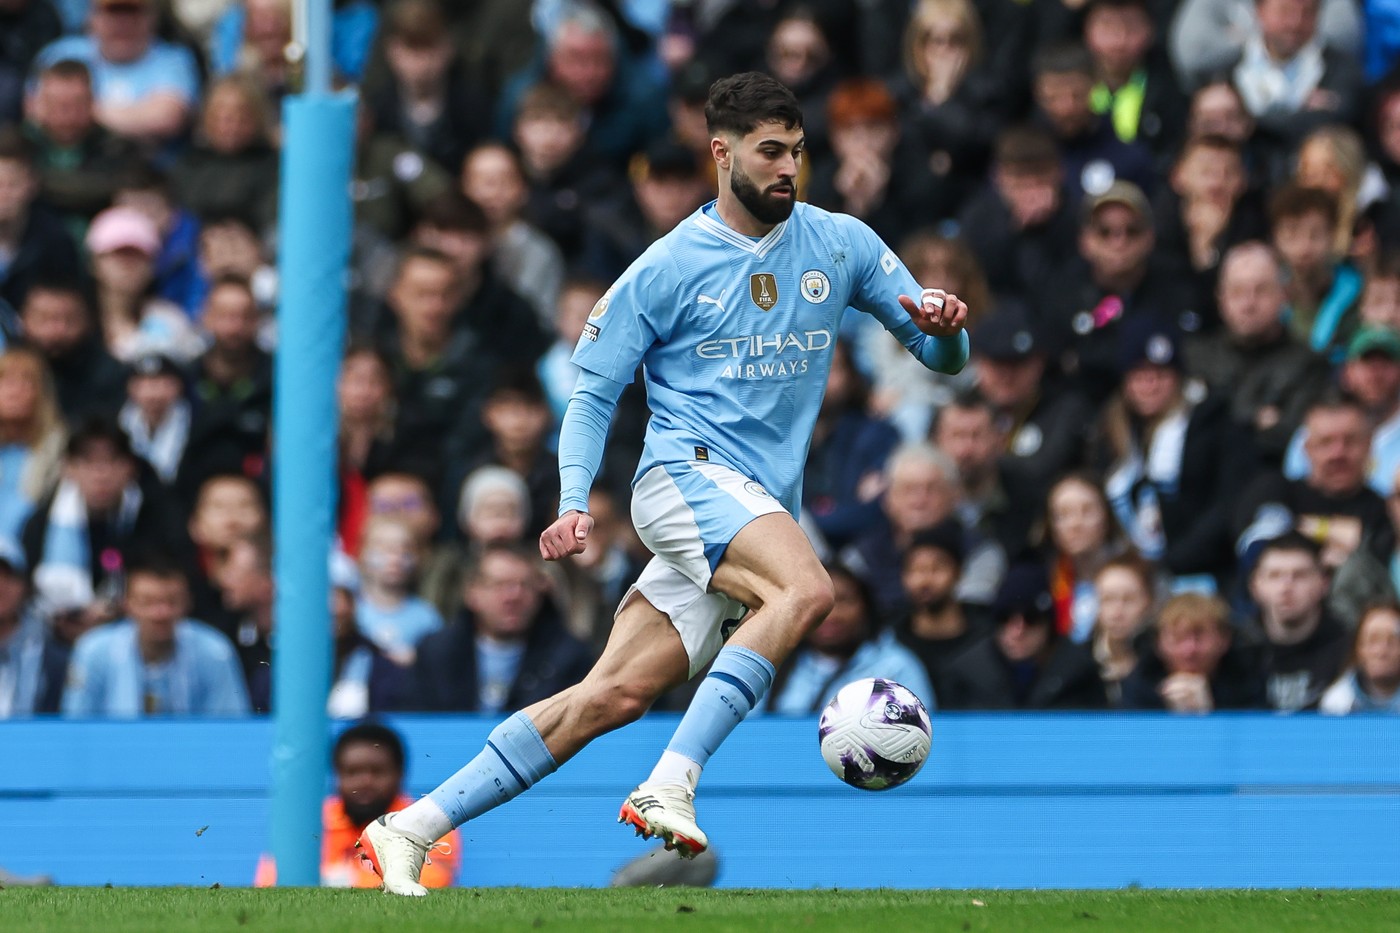 March 31, 2024, London, England, United Kingdom: JoÅ¡ko Gvardiol of Manchester City in action during the Premier League match Manchester City vs Arsenal at Etihad Stadium, Manchester, United Kingdom, 31st March 2024.,Image: 861437175, License: Rights-managed, Restrictions: , Model Release: no, Credit line: Mark Cosgrove / Zuma Press / Profimedia